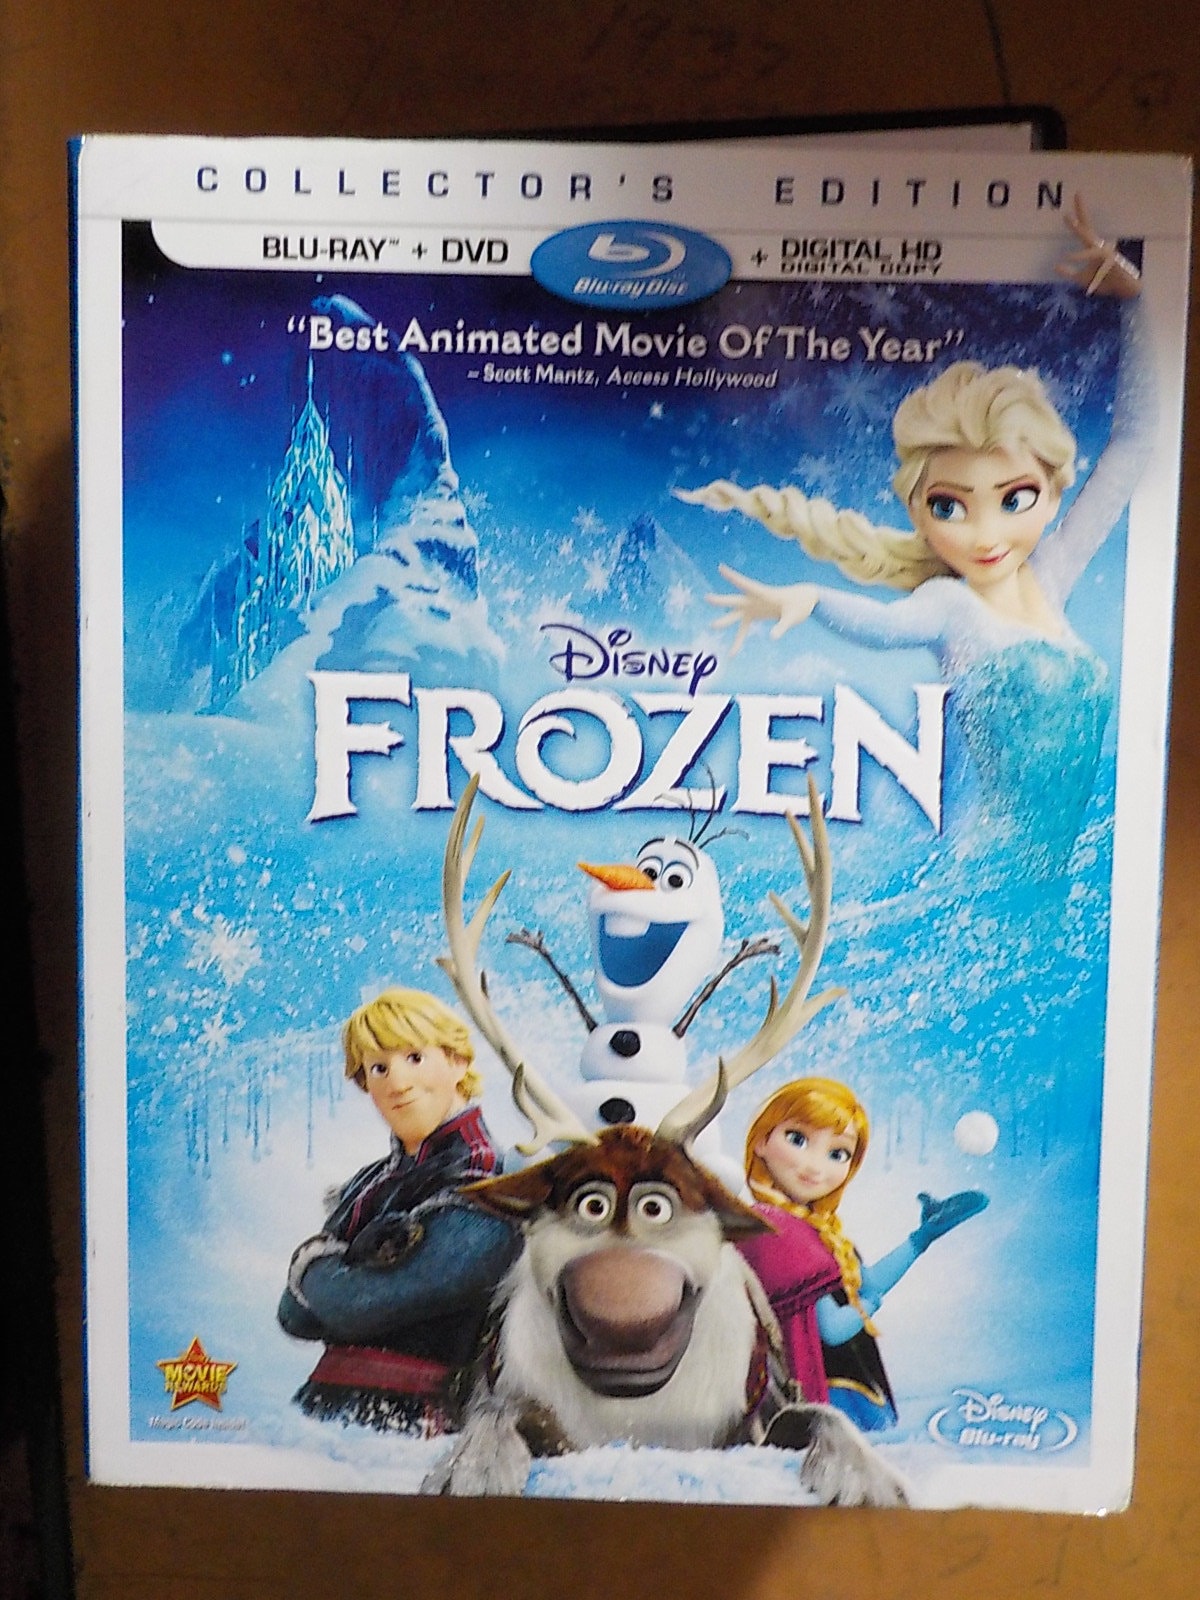 Frozen Blue Ray Classic DVD Movie Rated PG Free USA Shipping - Etsy